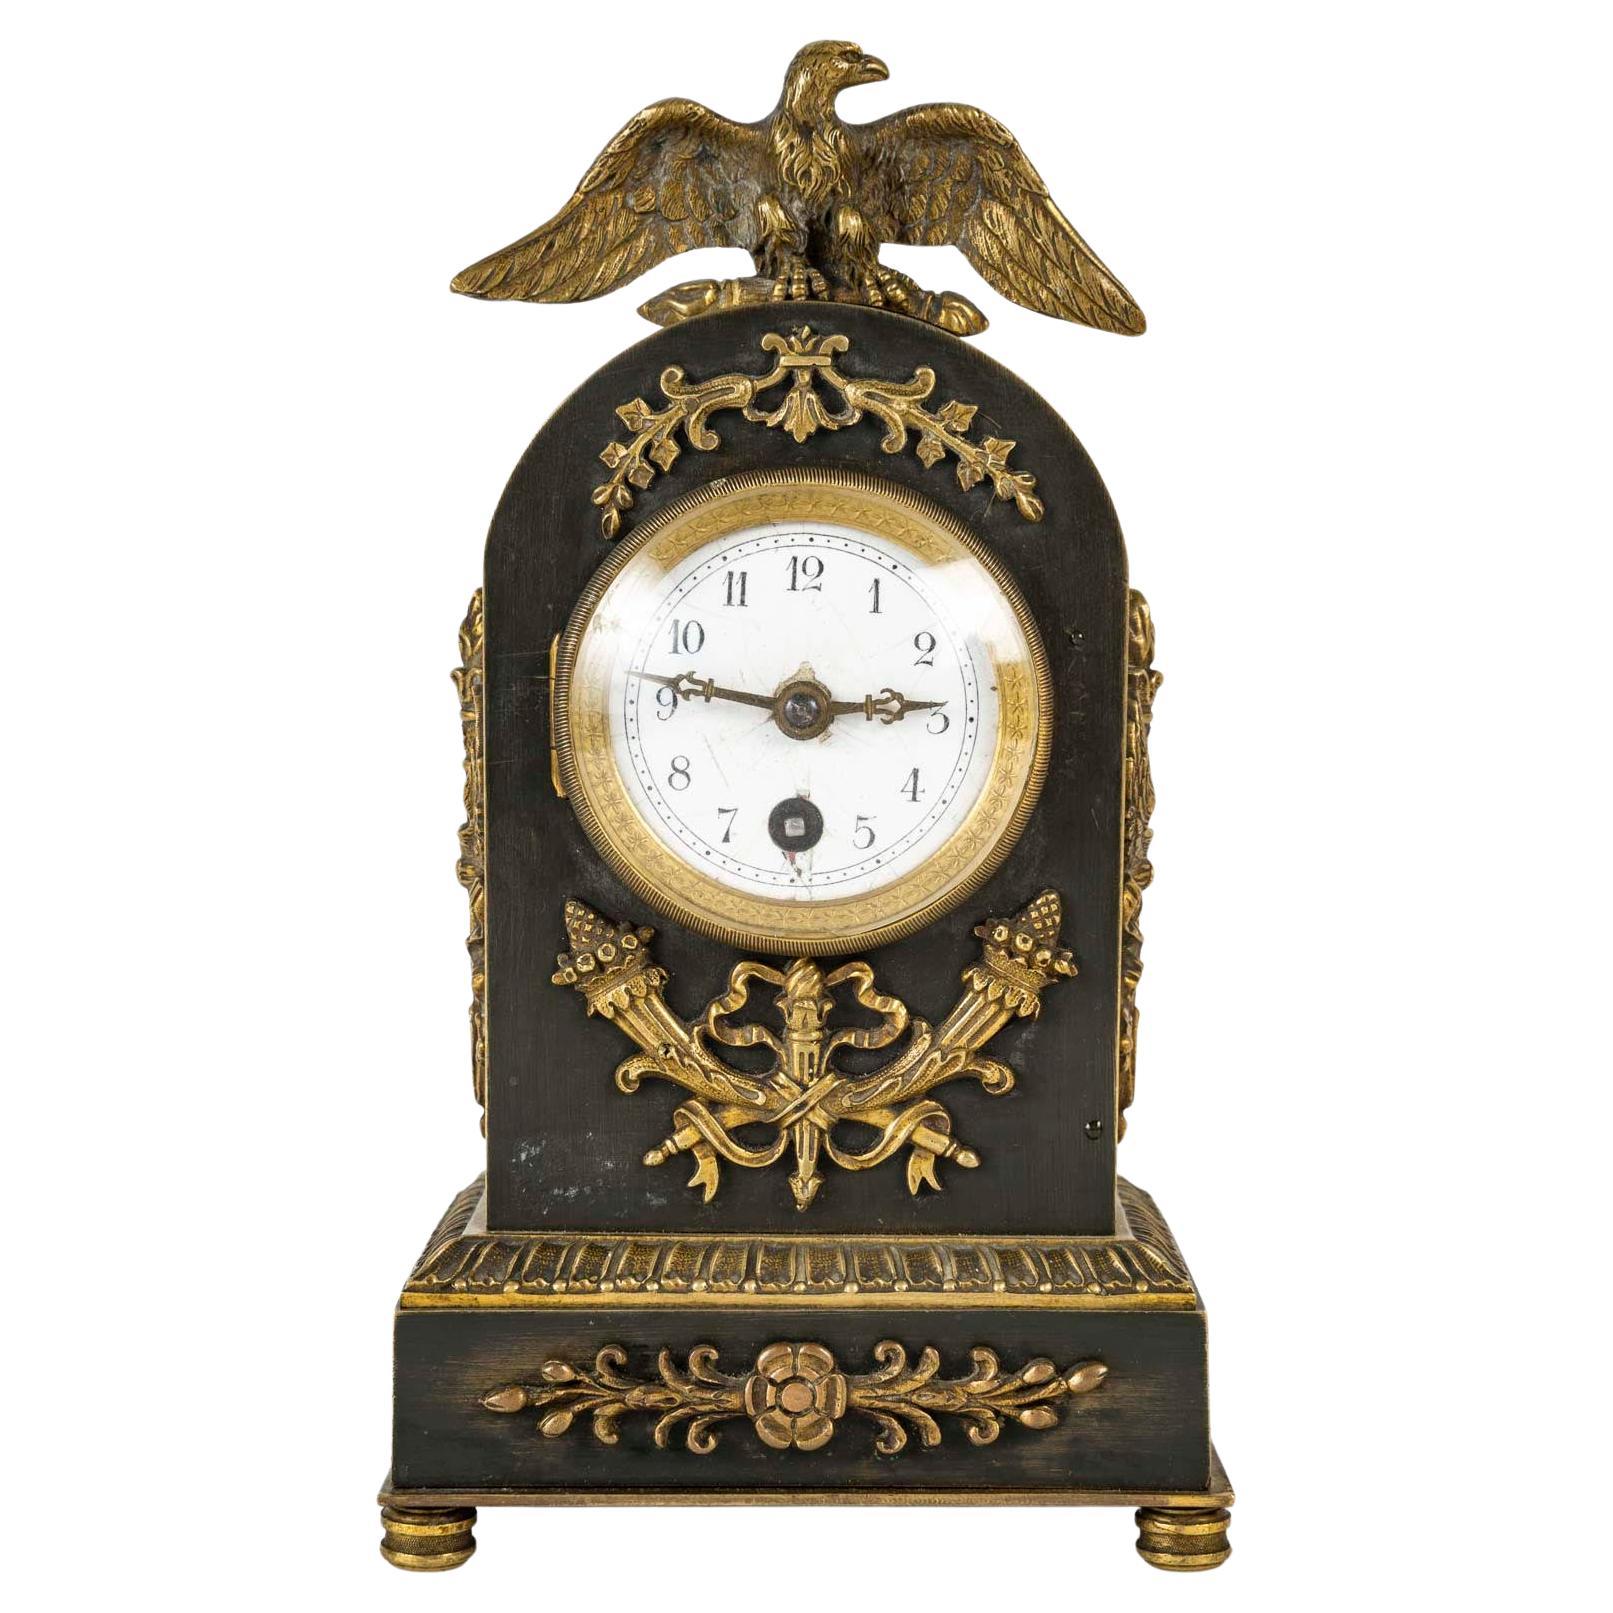 Empire Style Bronze Travel Clock, late 19th Century or Early 20th Century.